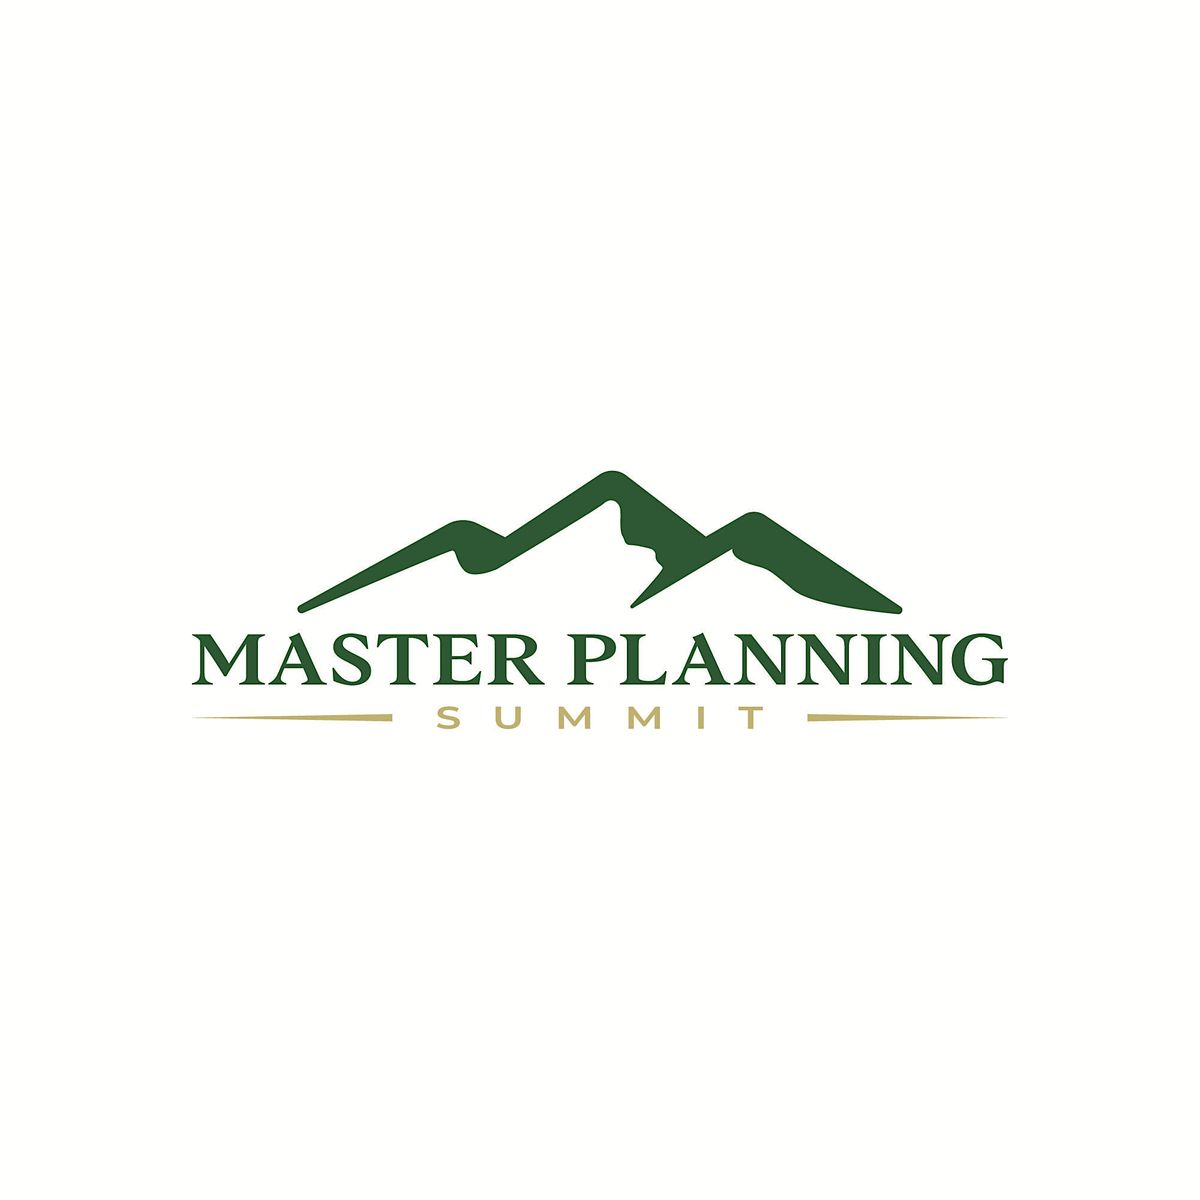 MacLean Financial Group's Master Planning Summit